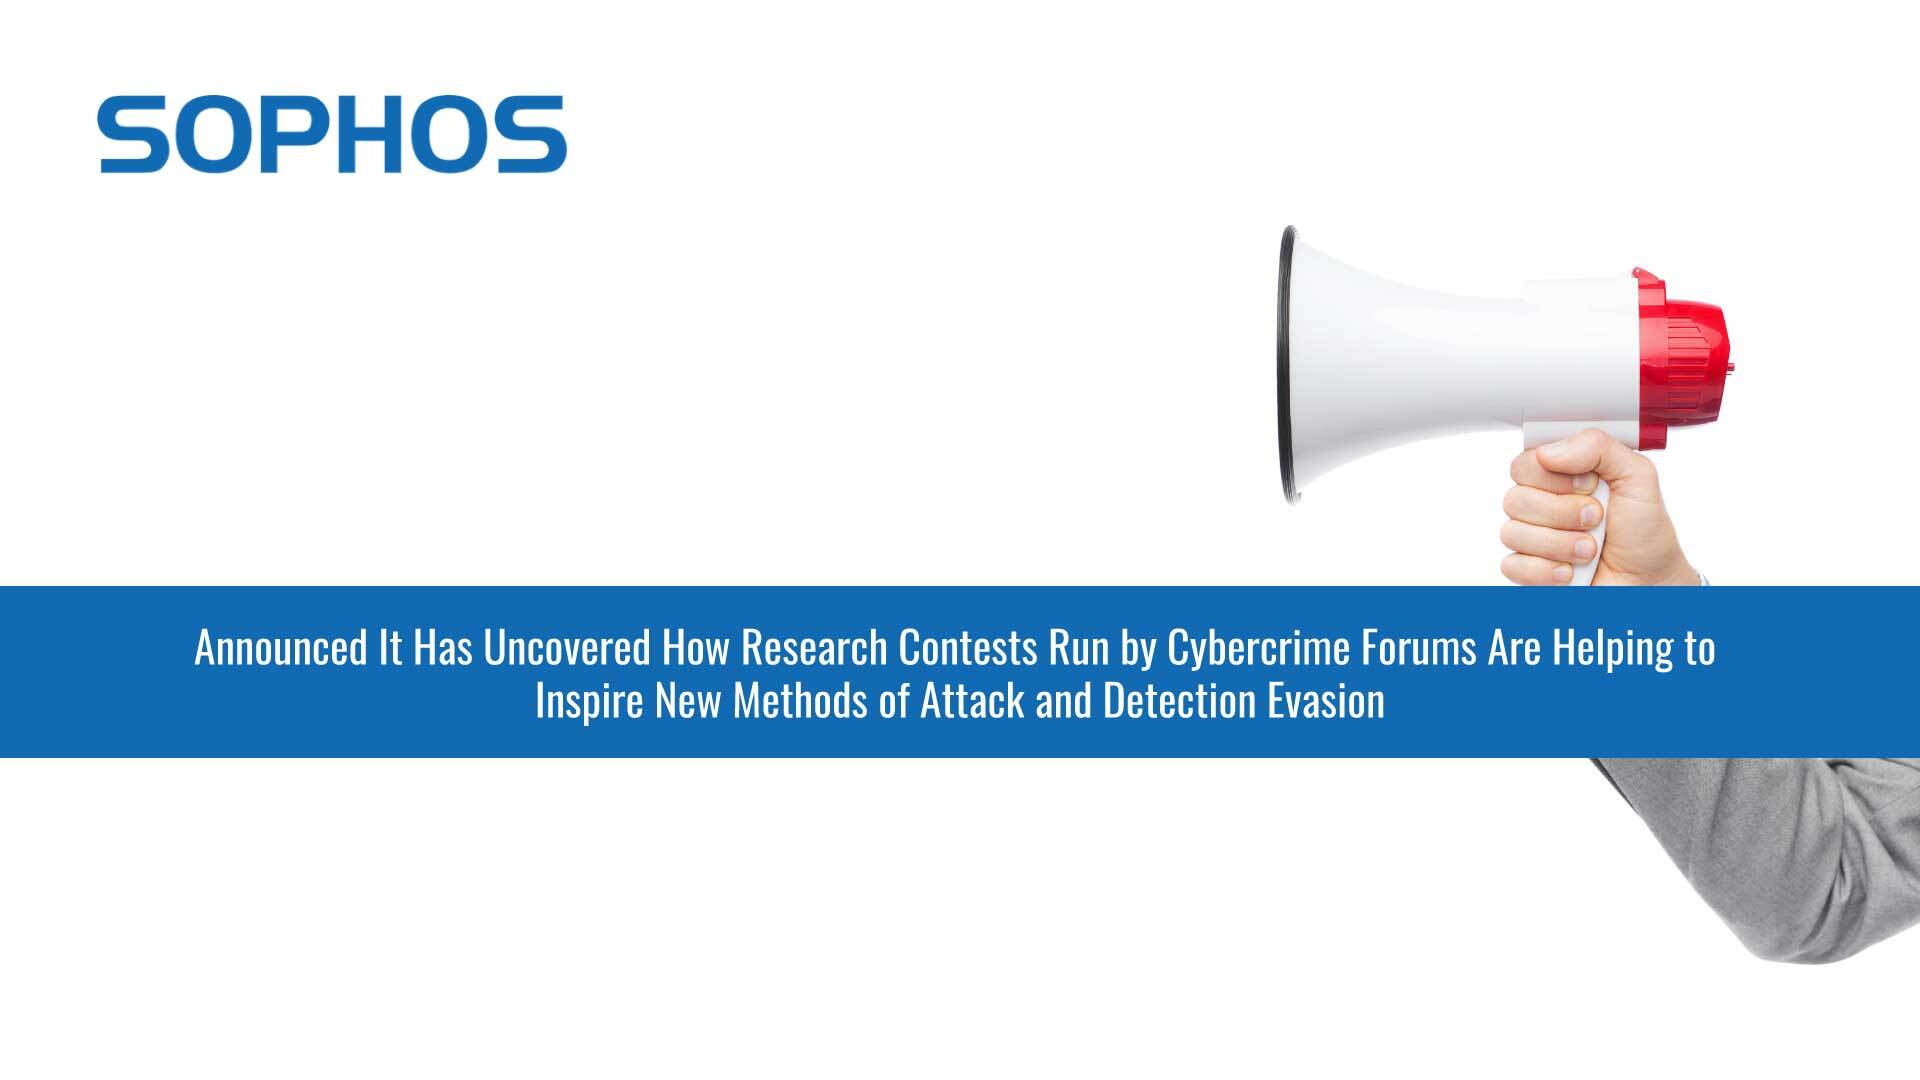 Adversary-Sponsored Research Contests on Cybercriminal Forums Focus on New Methods of Attack and Evasion, Sophos Research Reveals